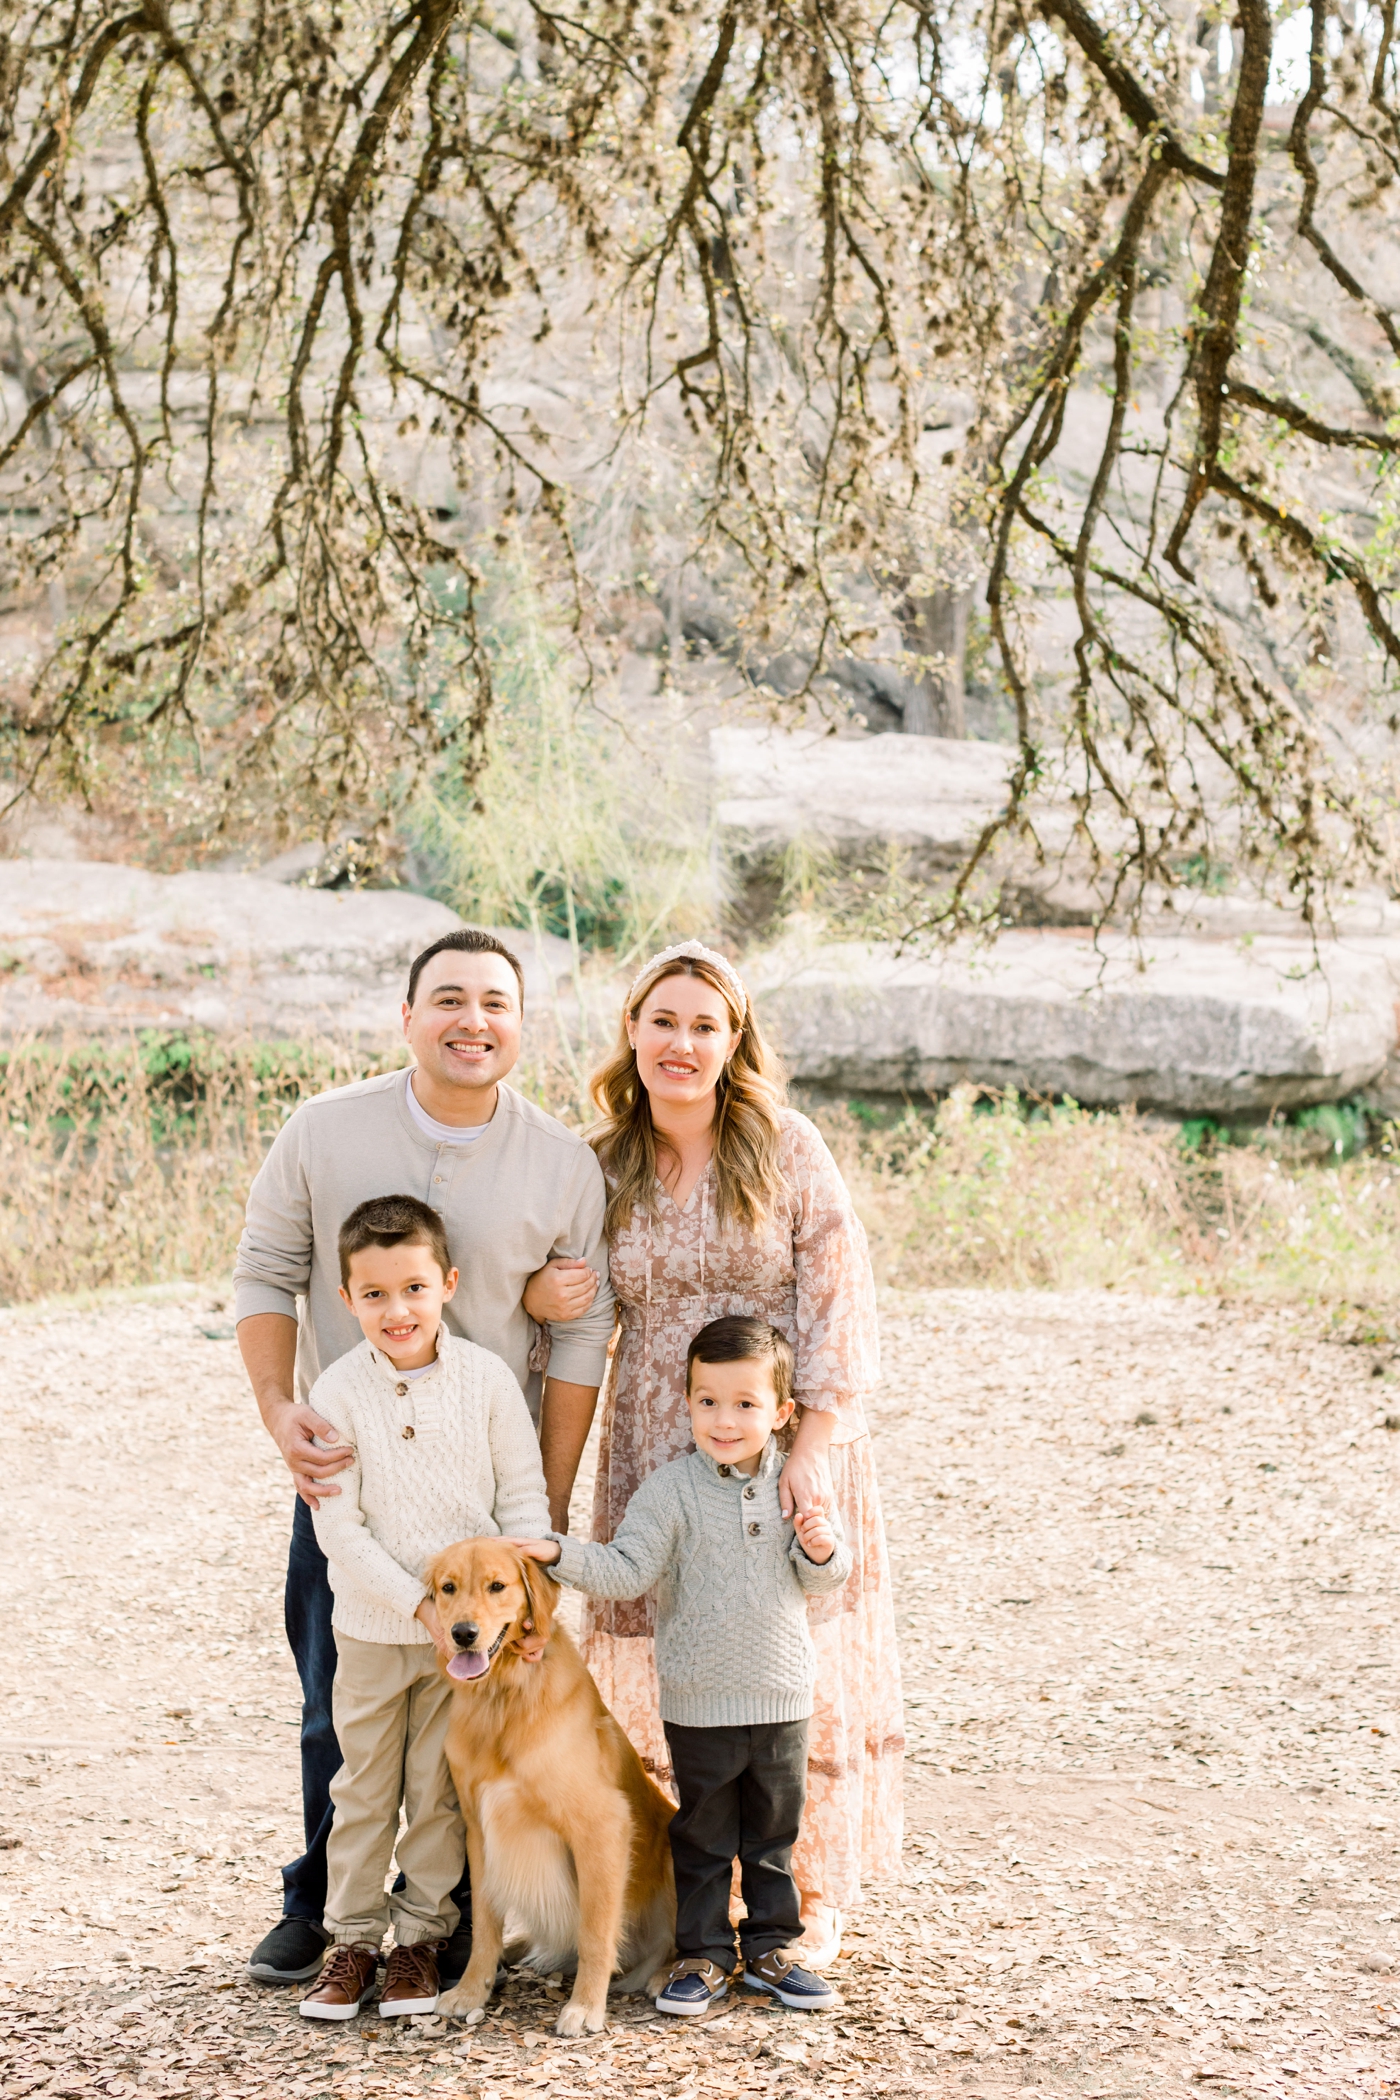 Parents with kids and dog under oak trees in Austin. Photo by Sana Ahmed Photography.